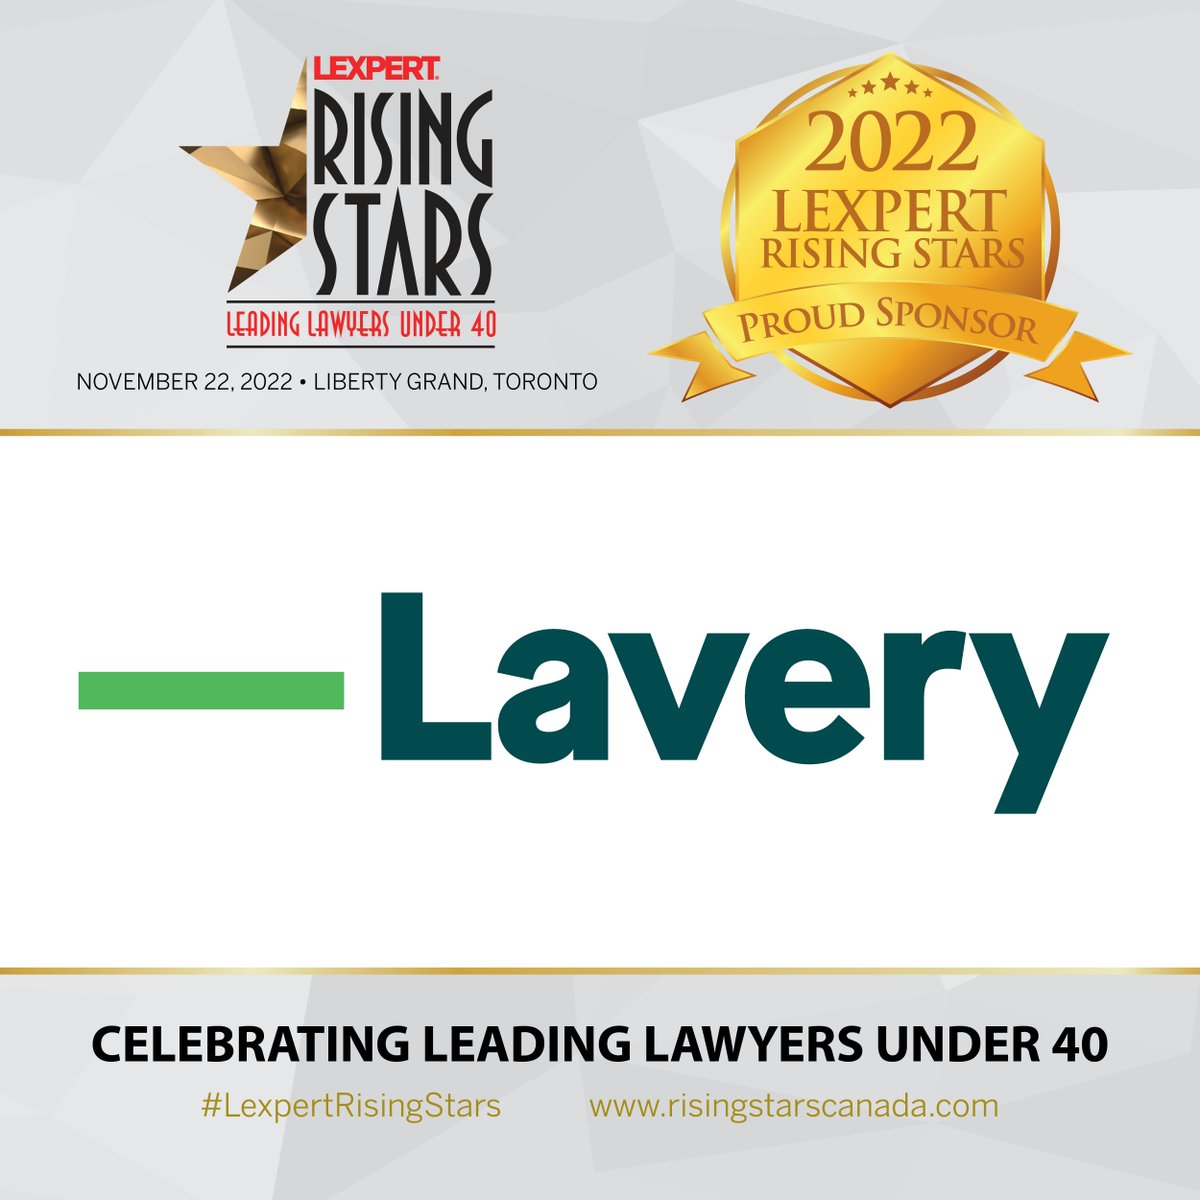 The 2022 Lexpert Rising Stars Awards is proudly partnered with Lavery. Join the celebration and book a table now!

Join us on November 22, 2022, at Liberty Grand, Toronto.

Register: hubs.ly/Q01qtq3D0
#LexpertRisingStars #LawyersCanada #CanadianLegal #LawAwards #RisingStars